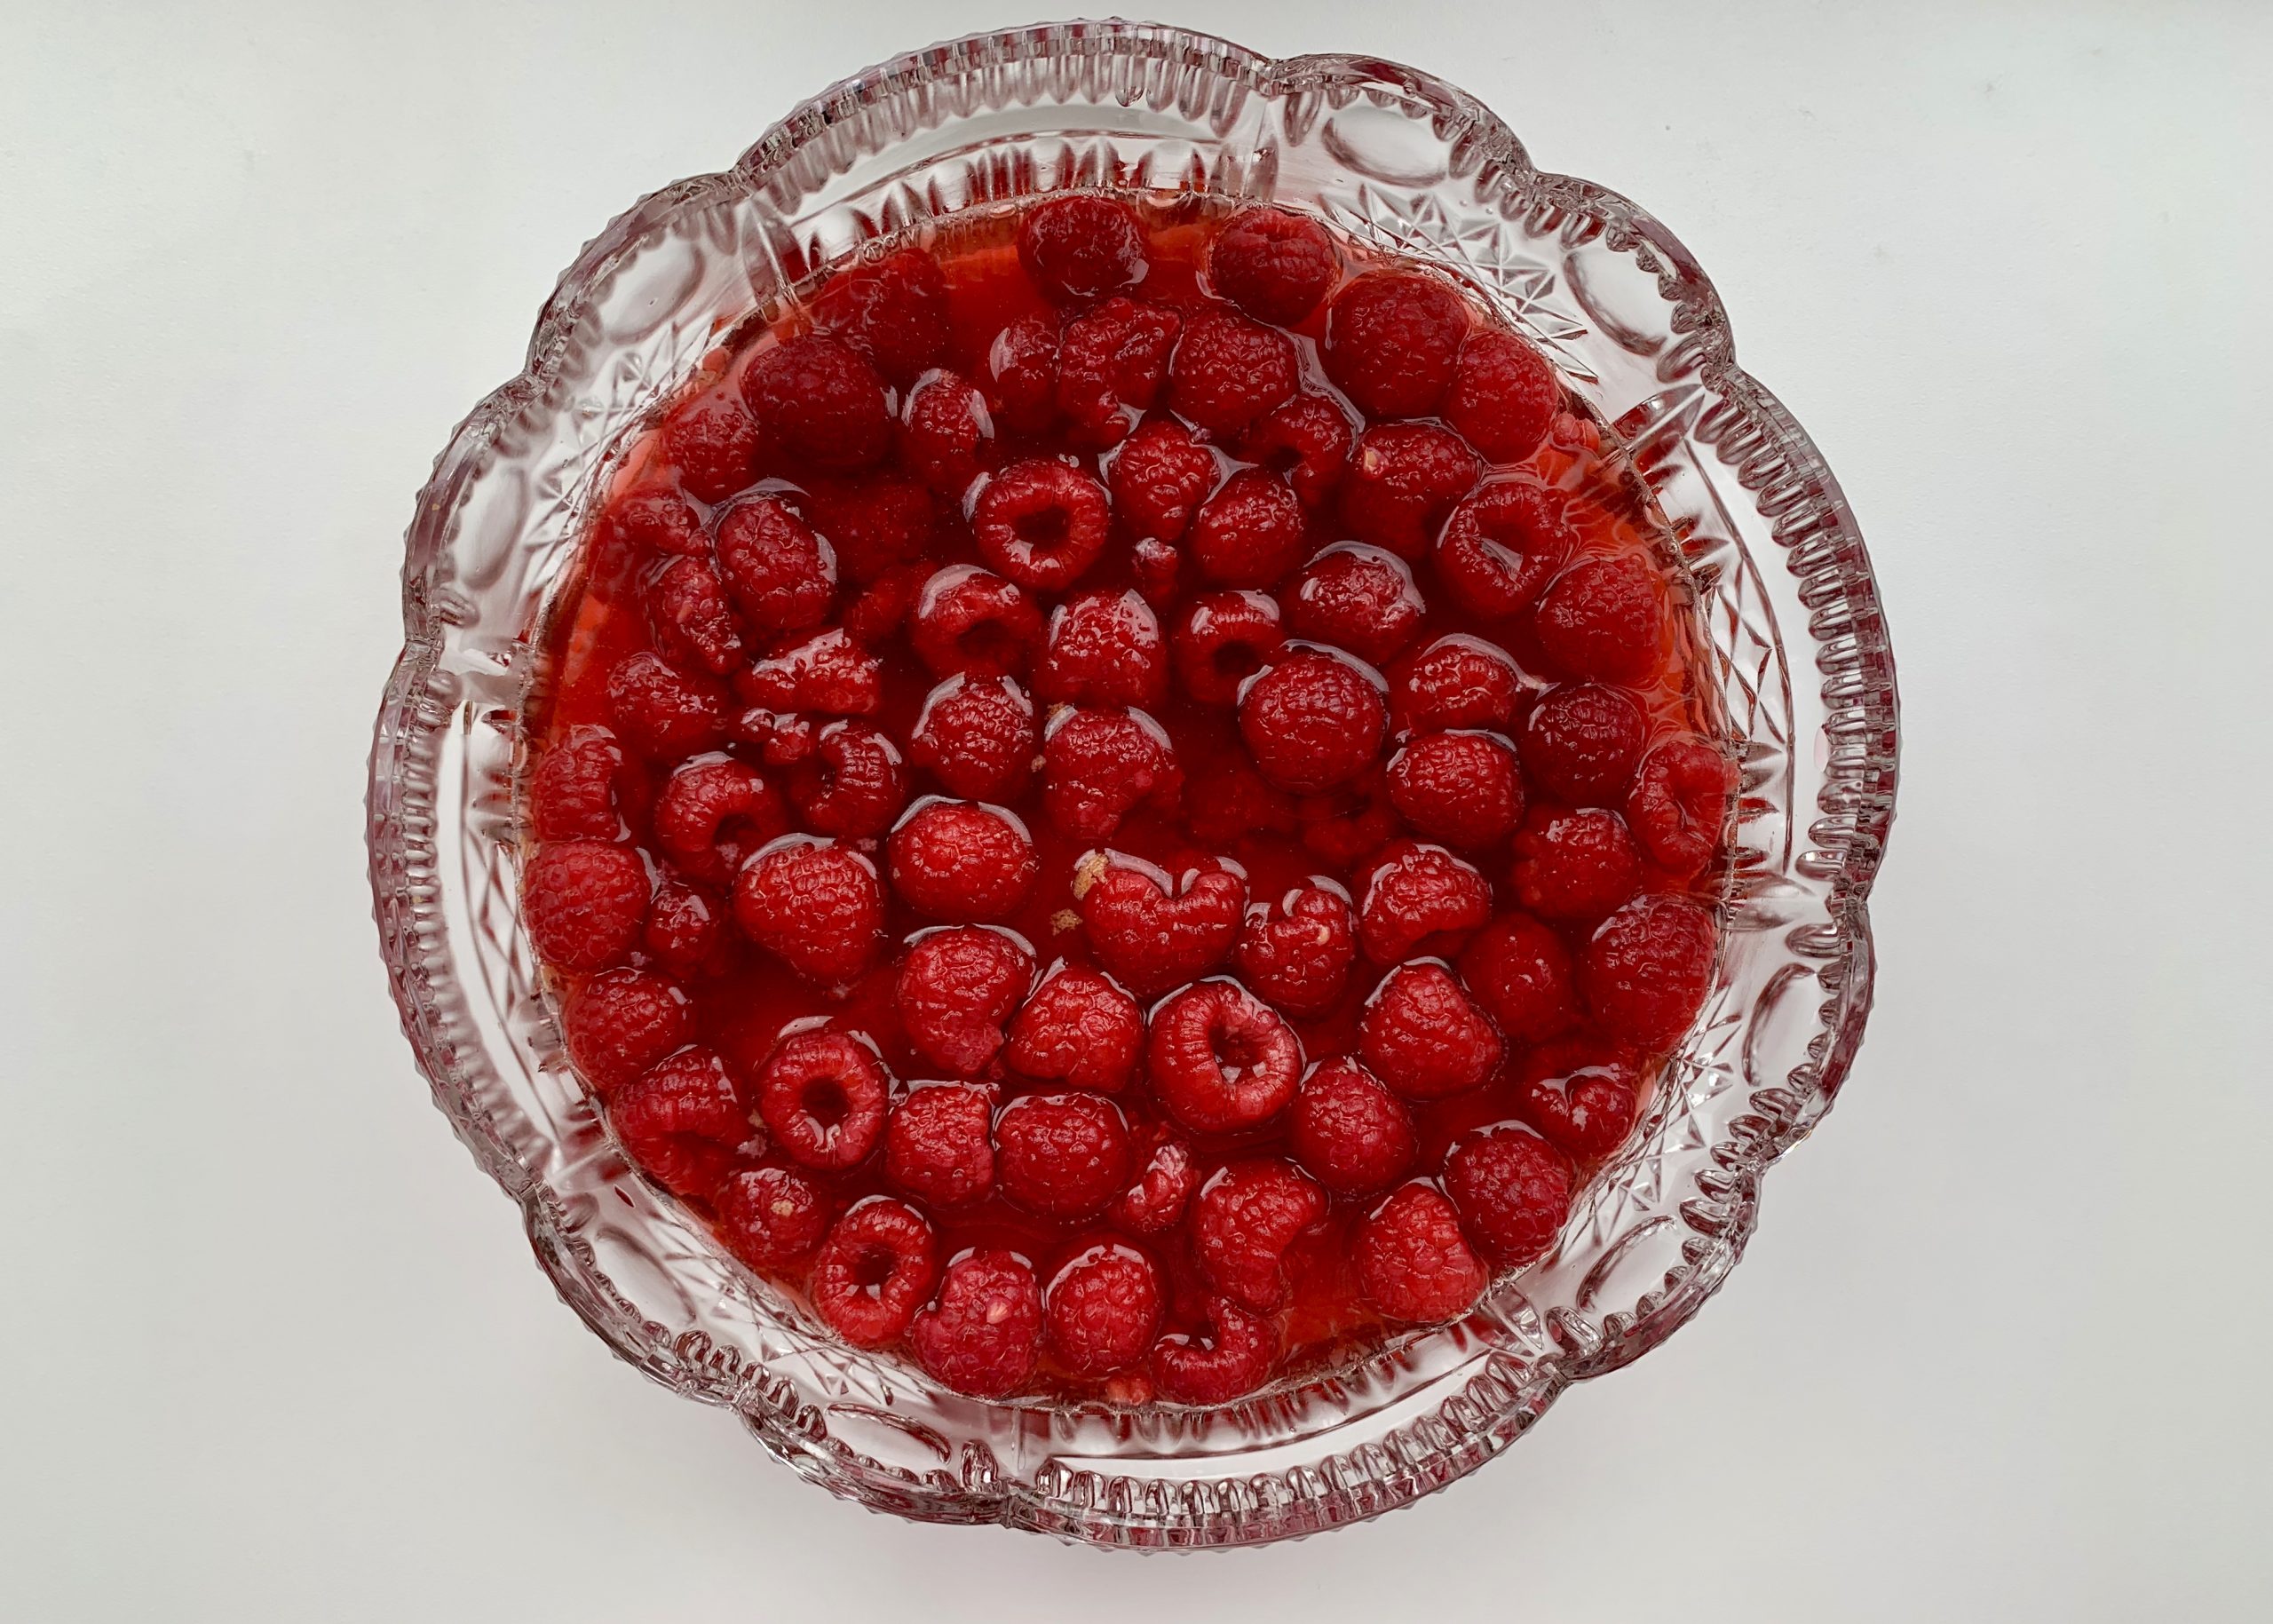 The base for a gluten free trifle in a glass bowl